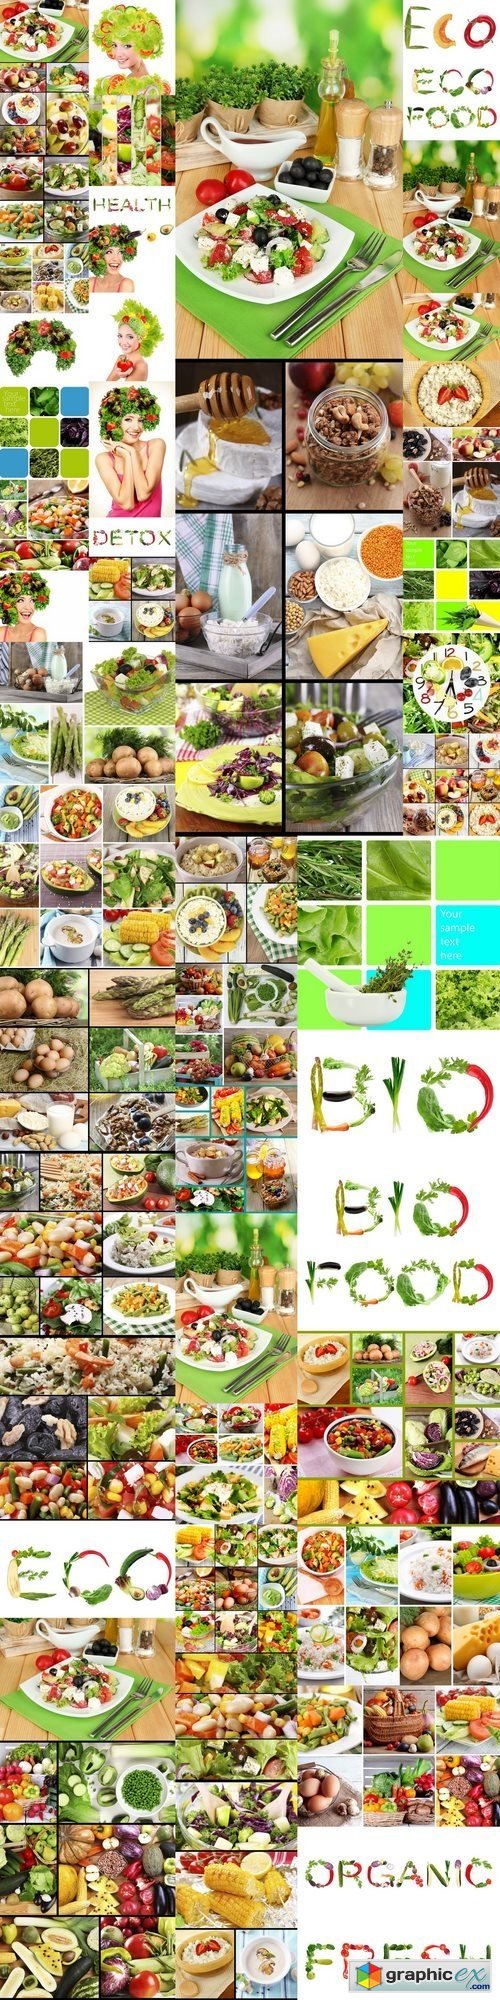 Healthy dishes and products in collage